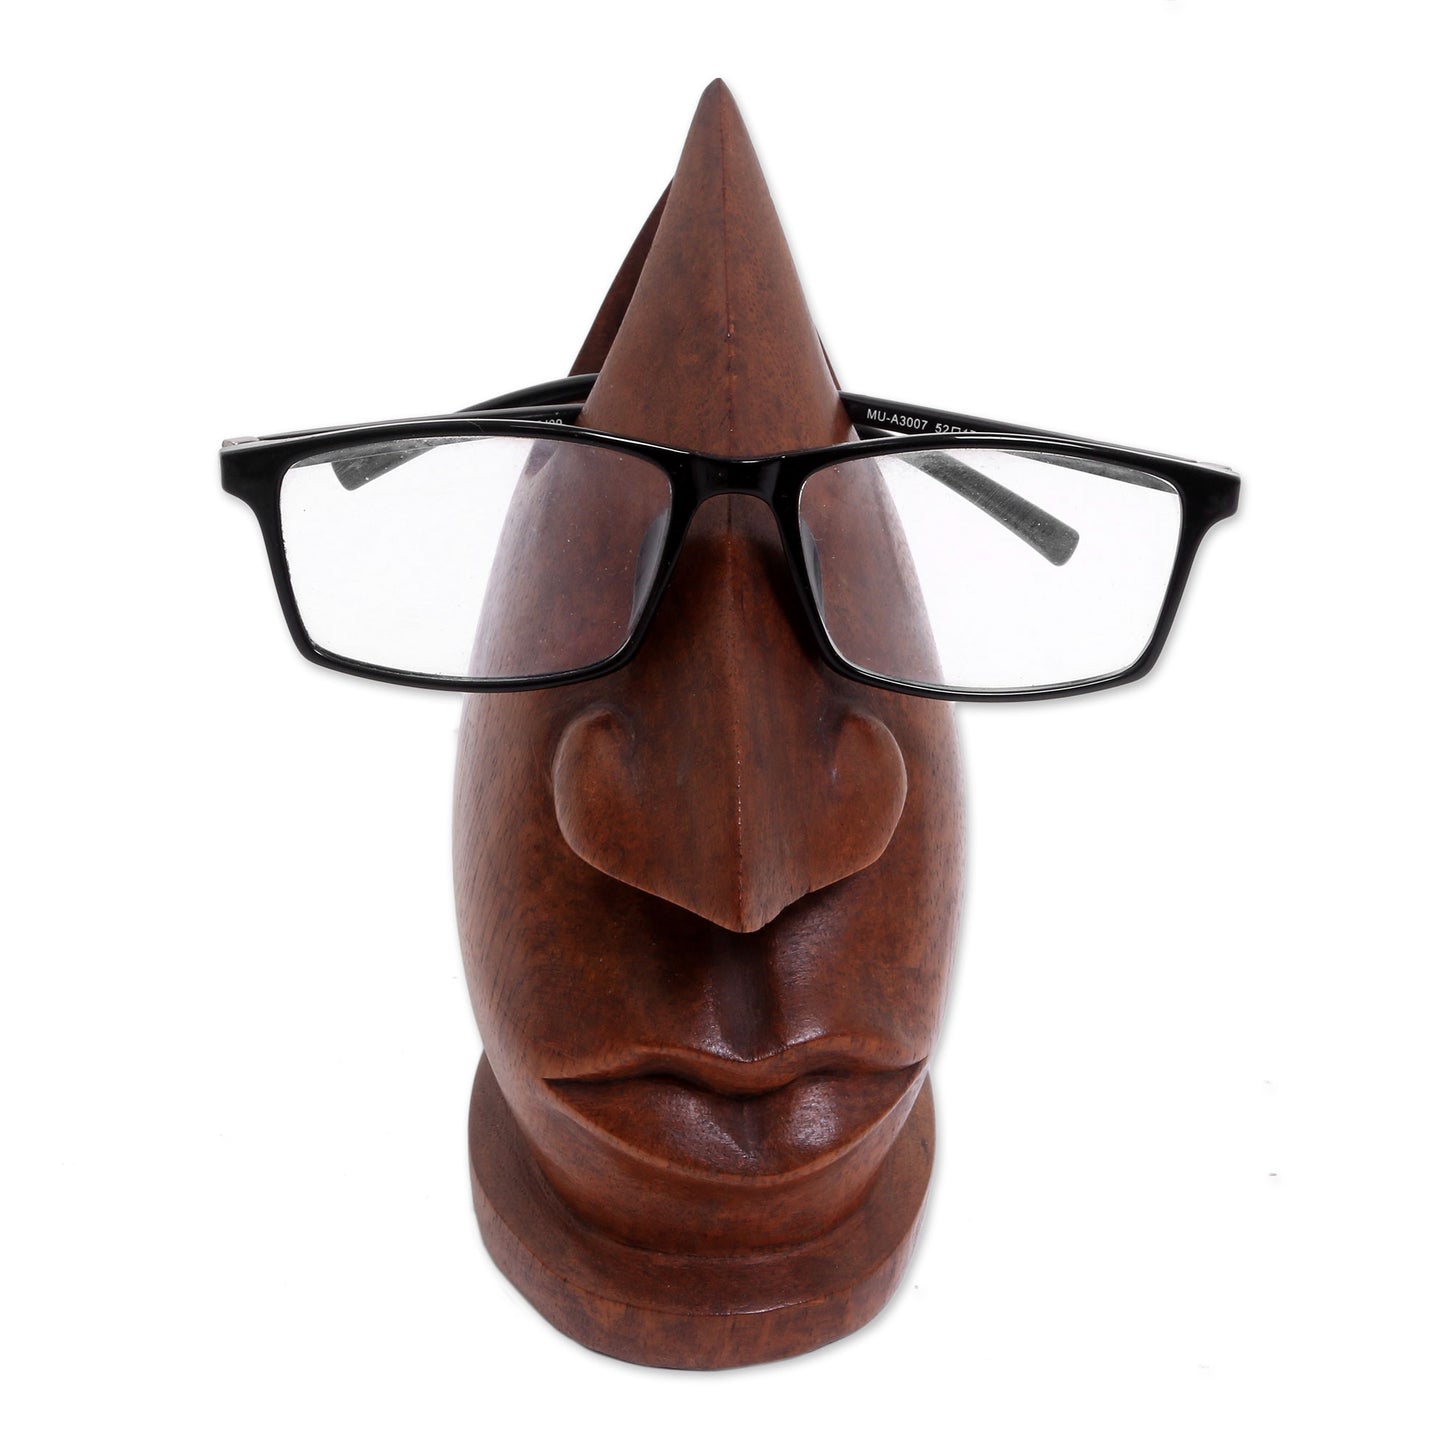 Prominent Nose in Light Brown Wood Eyeglasses Stand in Light Brown from Bali